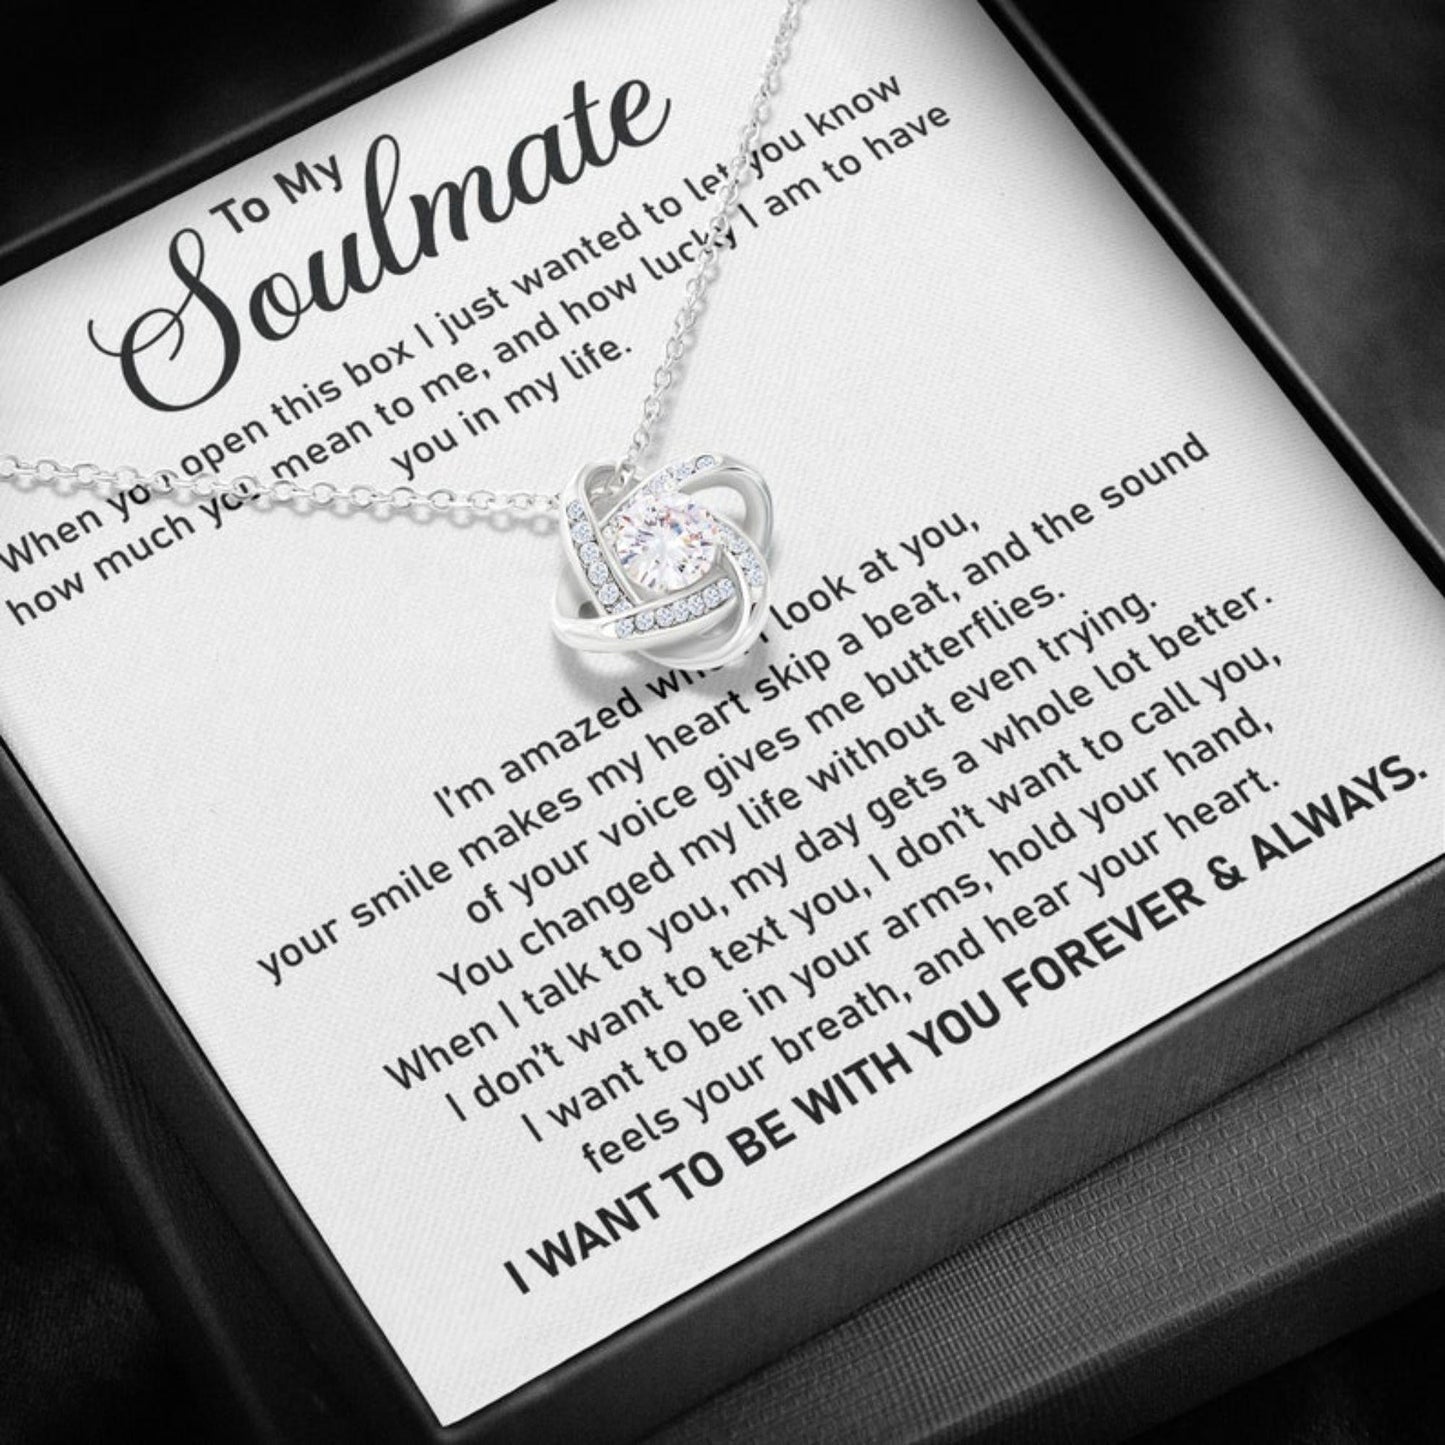 Girlfriend Necklace, Wife Necklace, To My Soulmate Necklace, Sentimental Gifts For Wife Girlfriend, Valentines Day Necklace